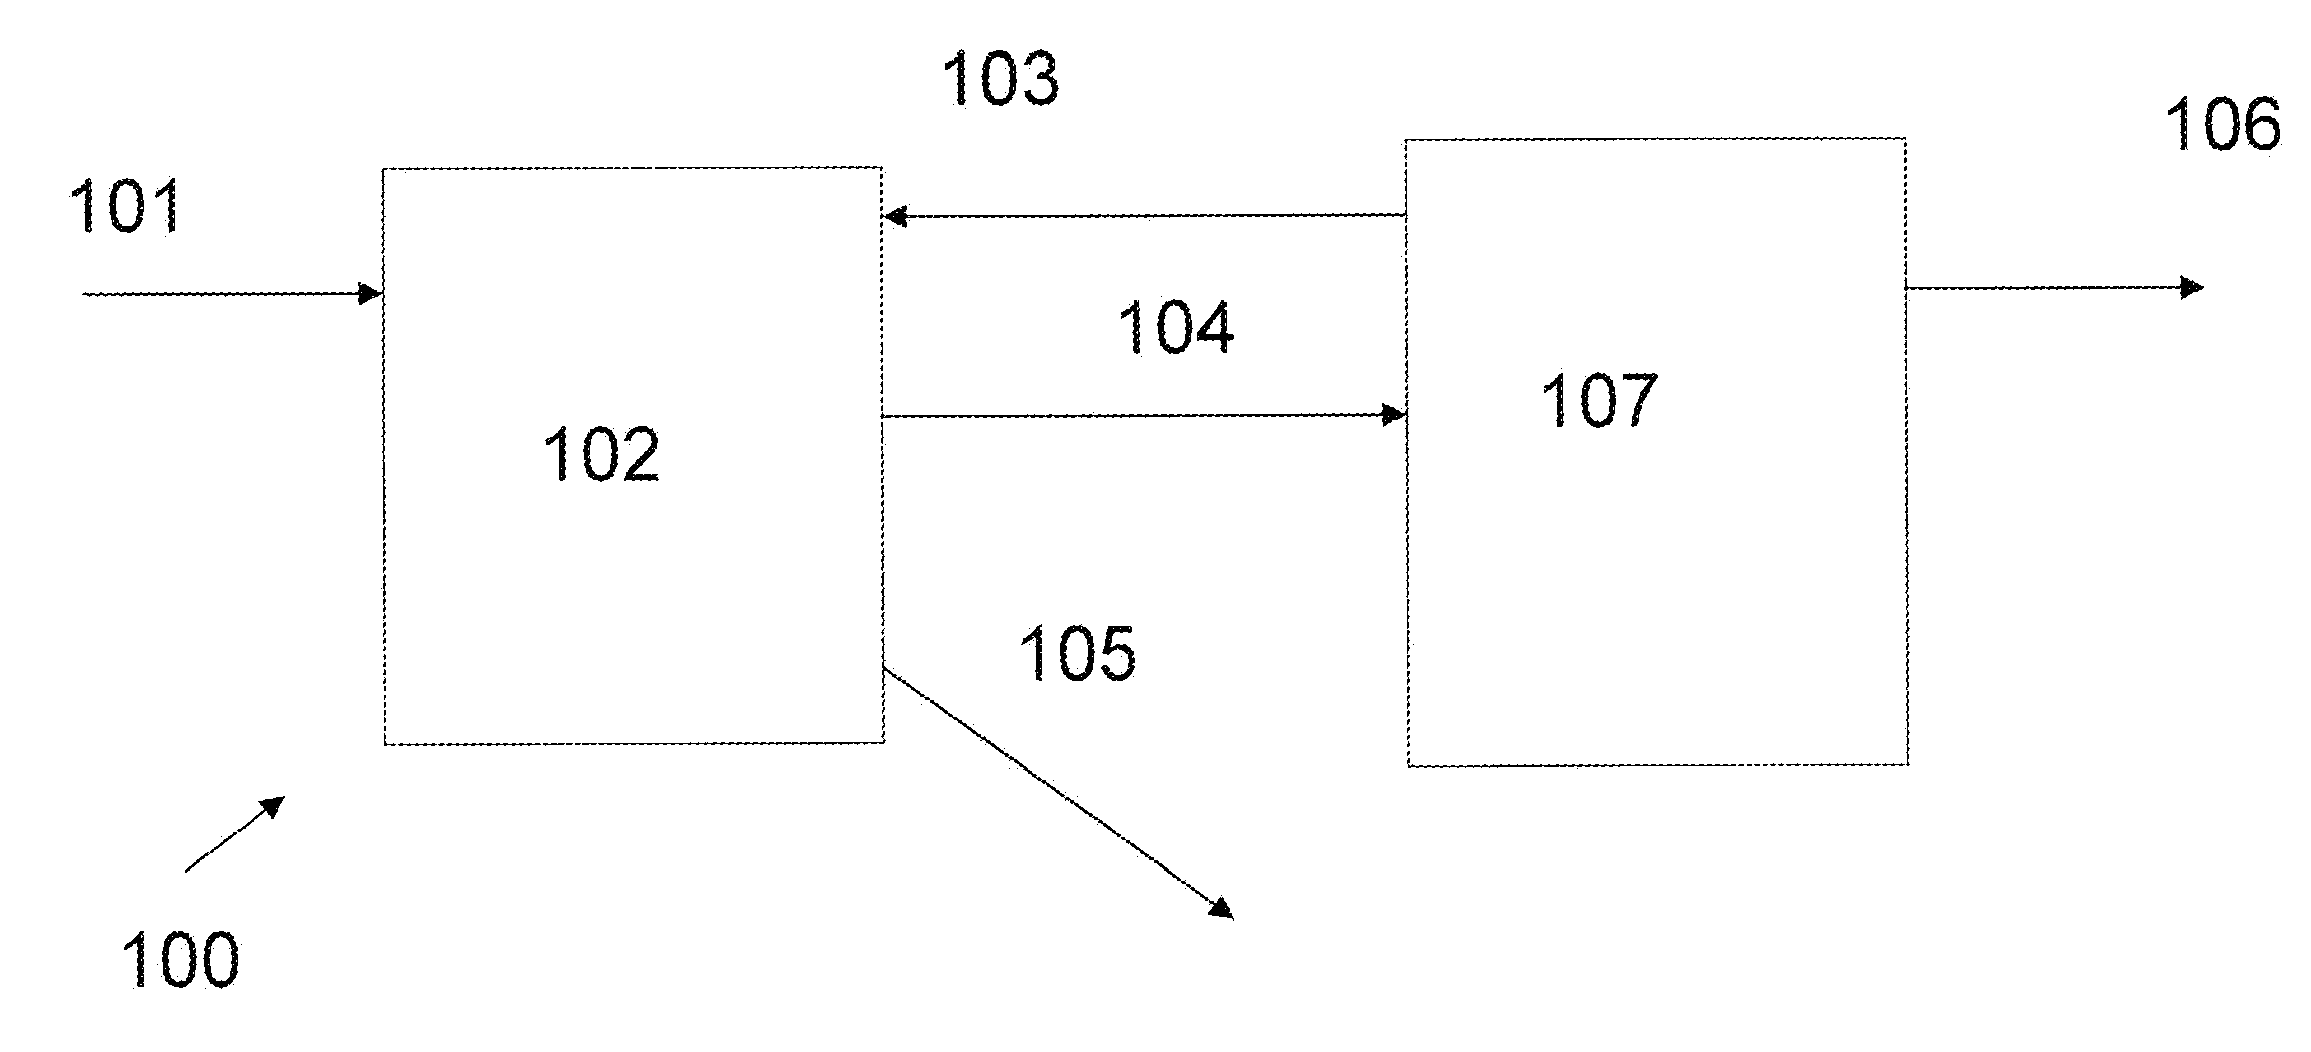 Process for generating a hydrocarbon feedstock from lignin